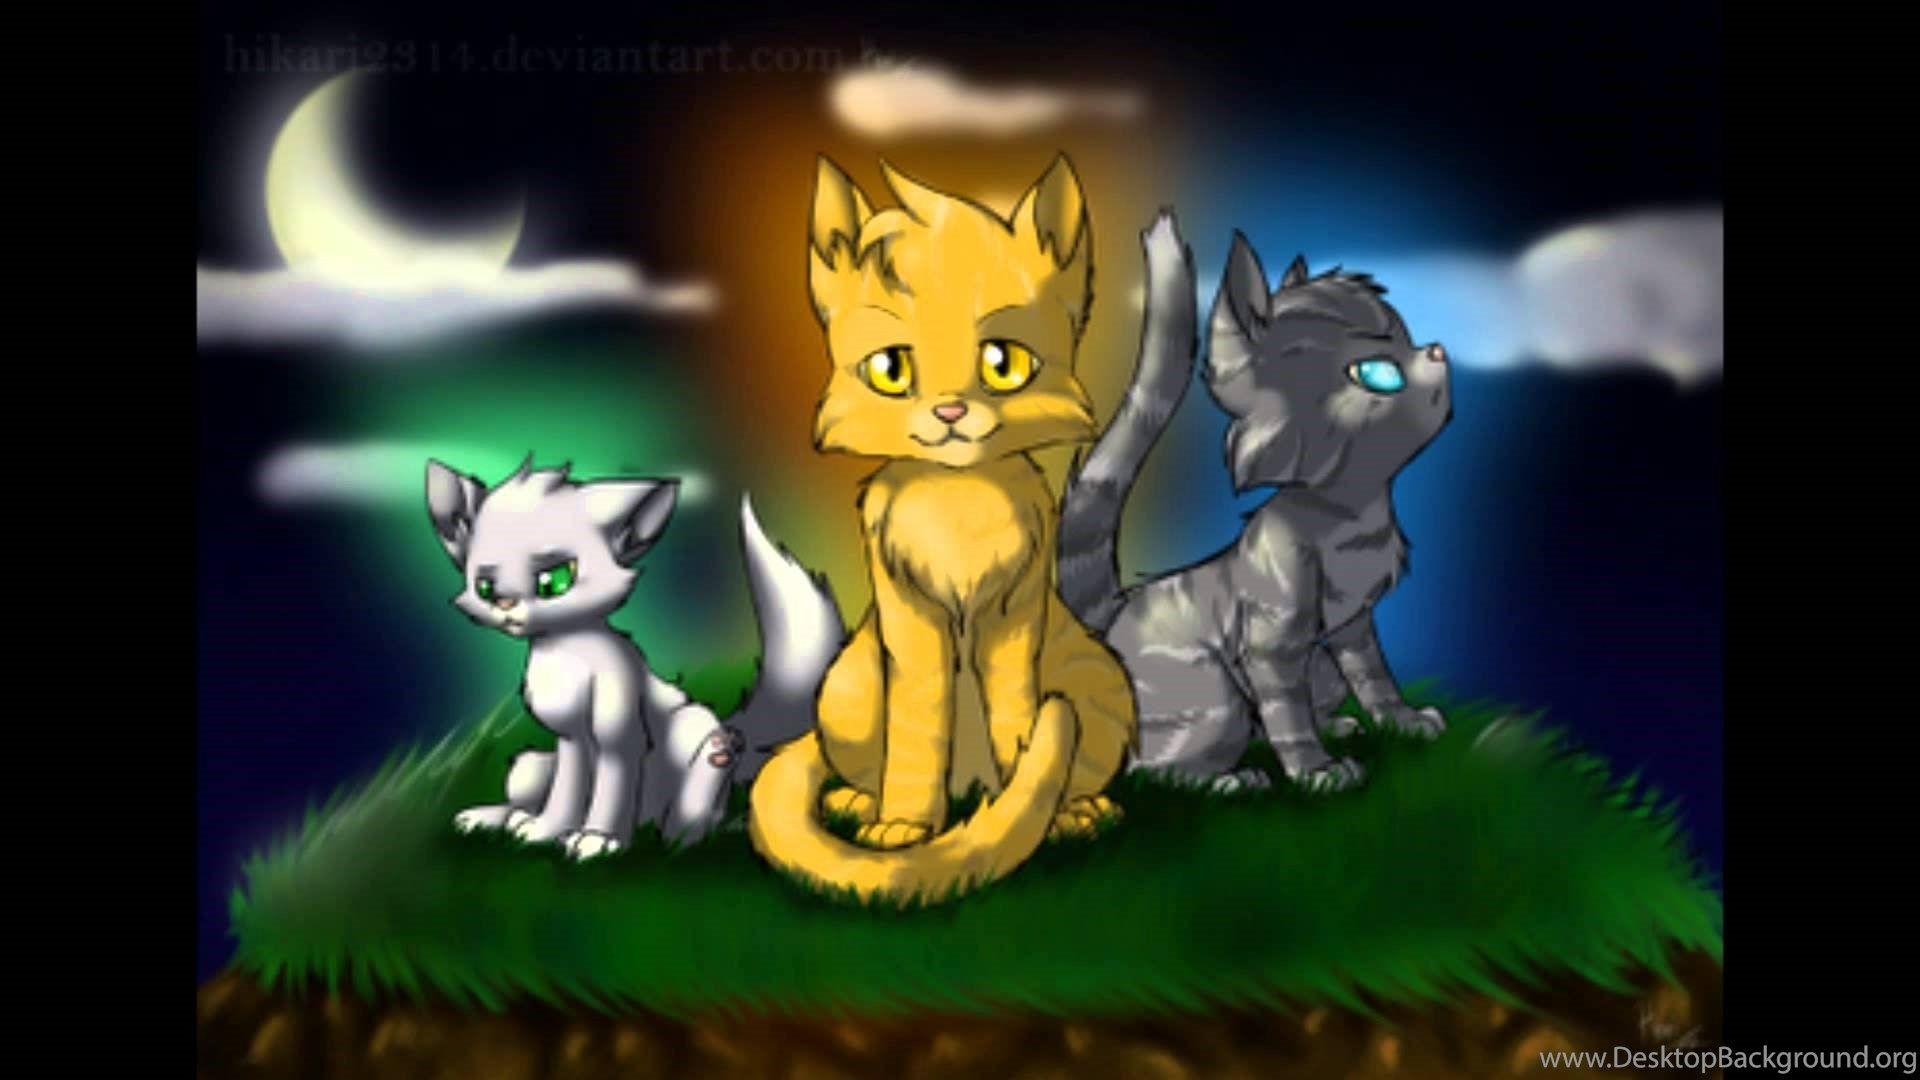 Game] Warrior Cats: Untold Tales